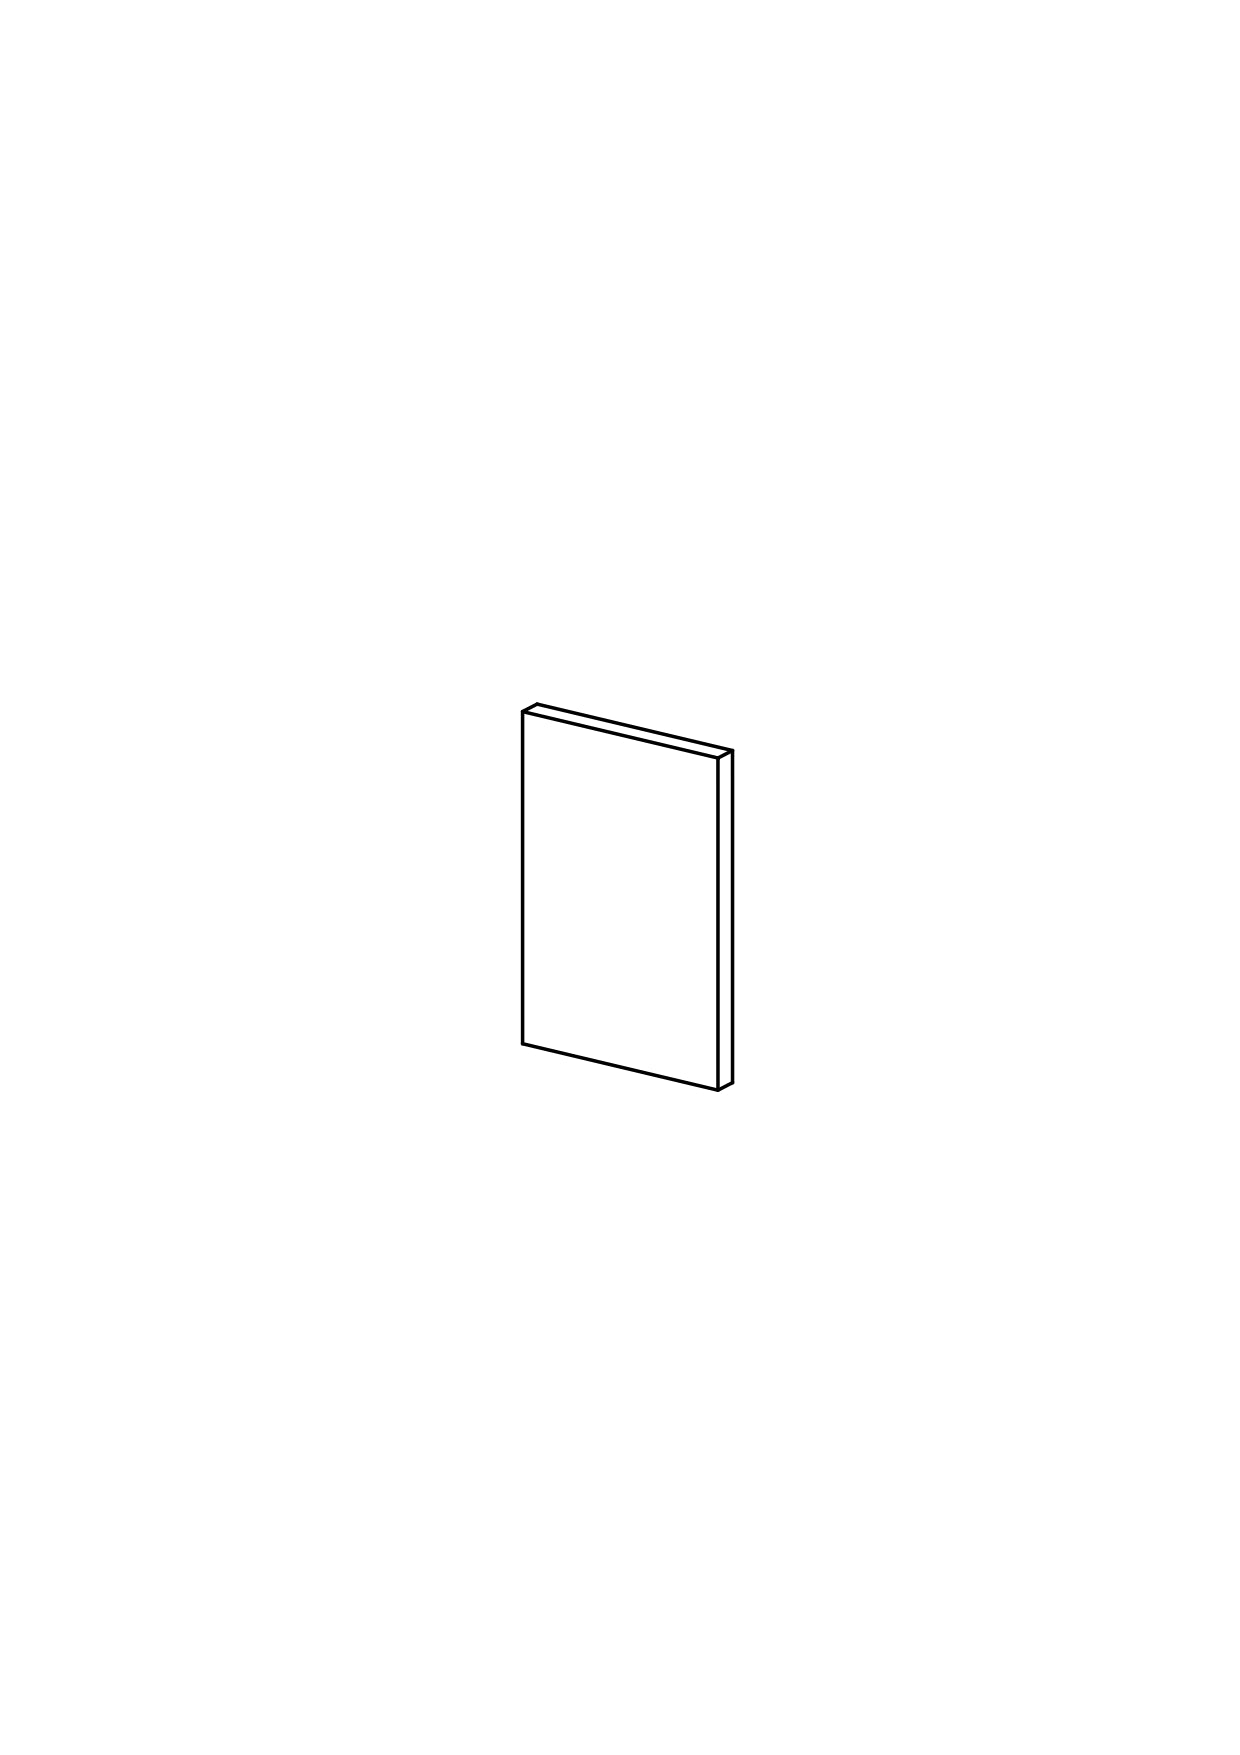 40x60 - Cover Panel - Plain - Unpainted (Raw) - METOD